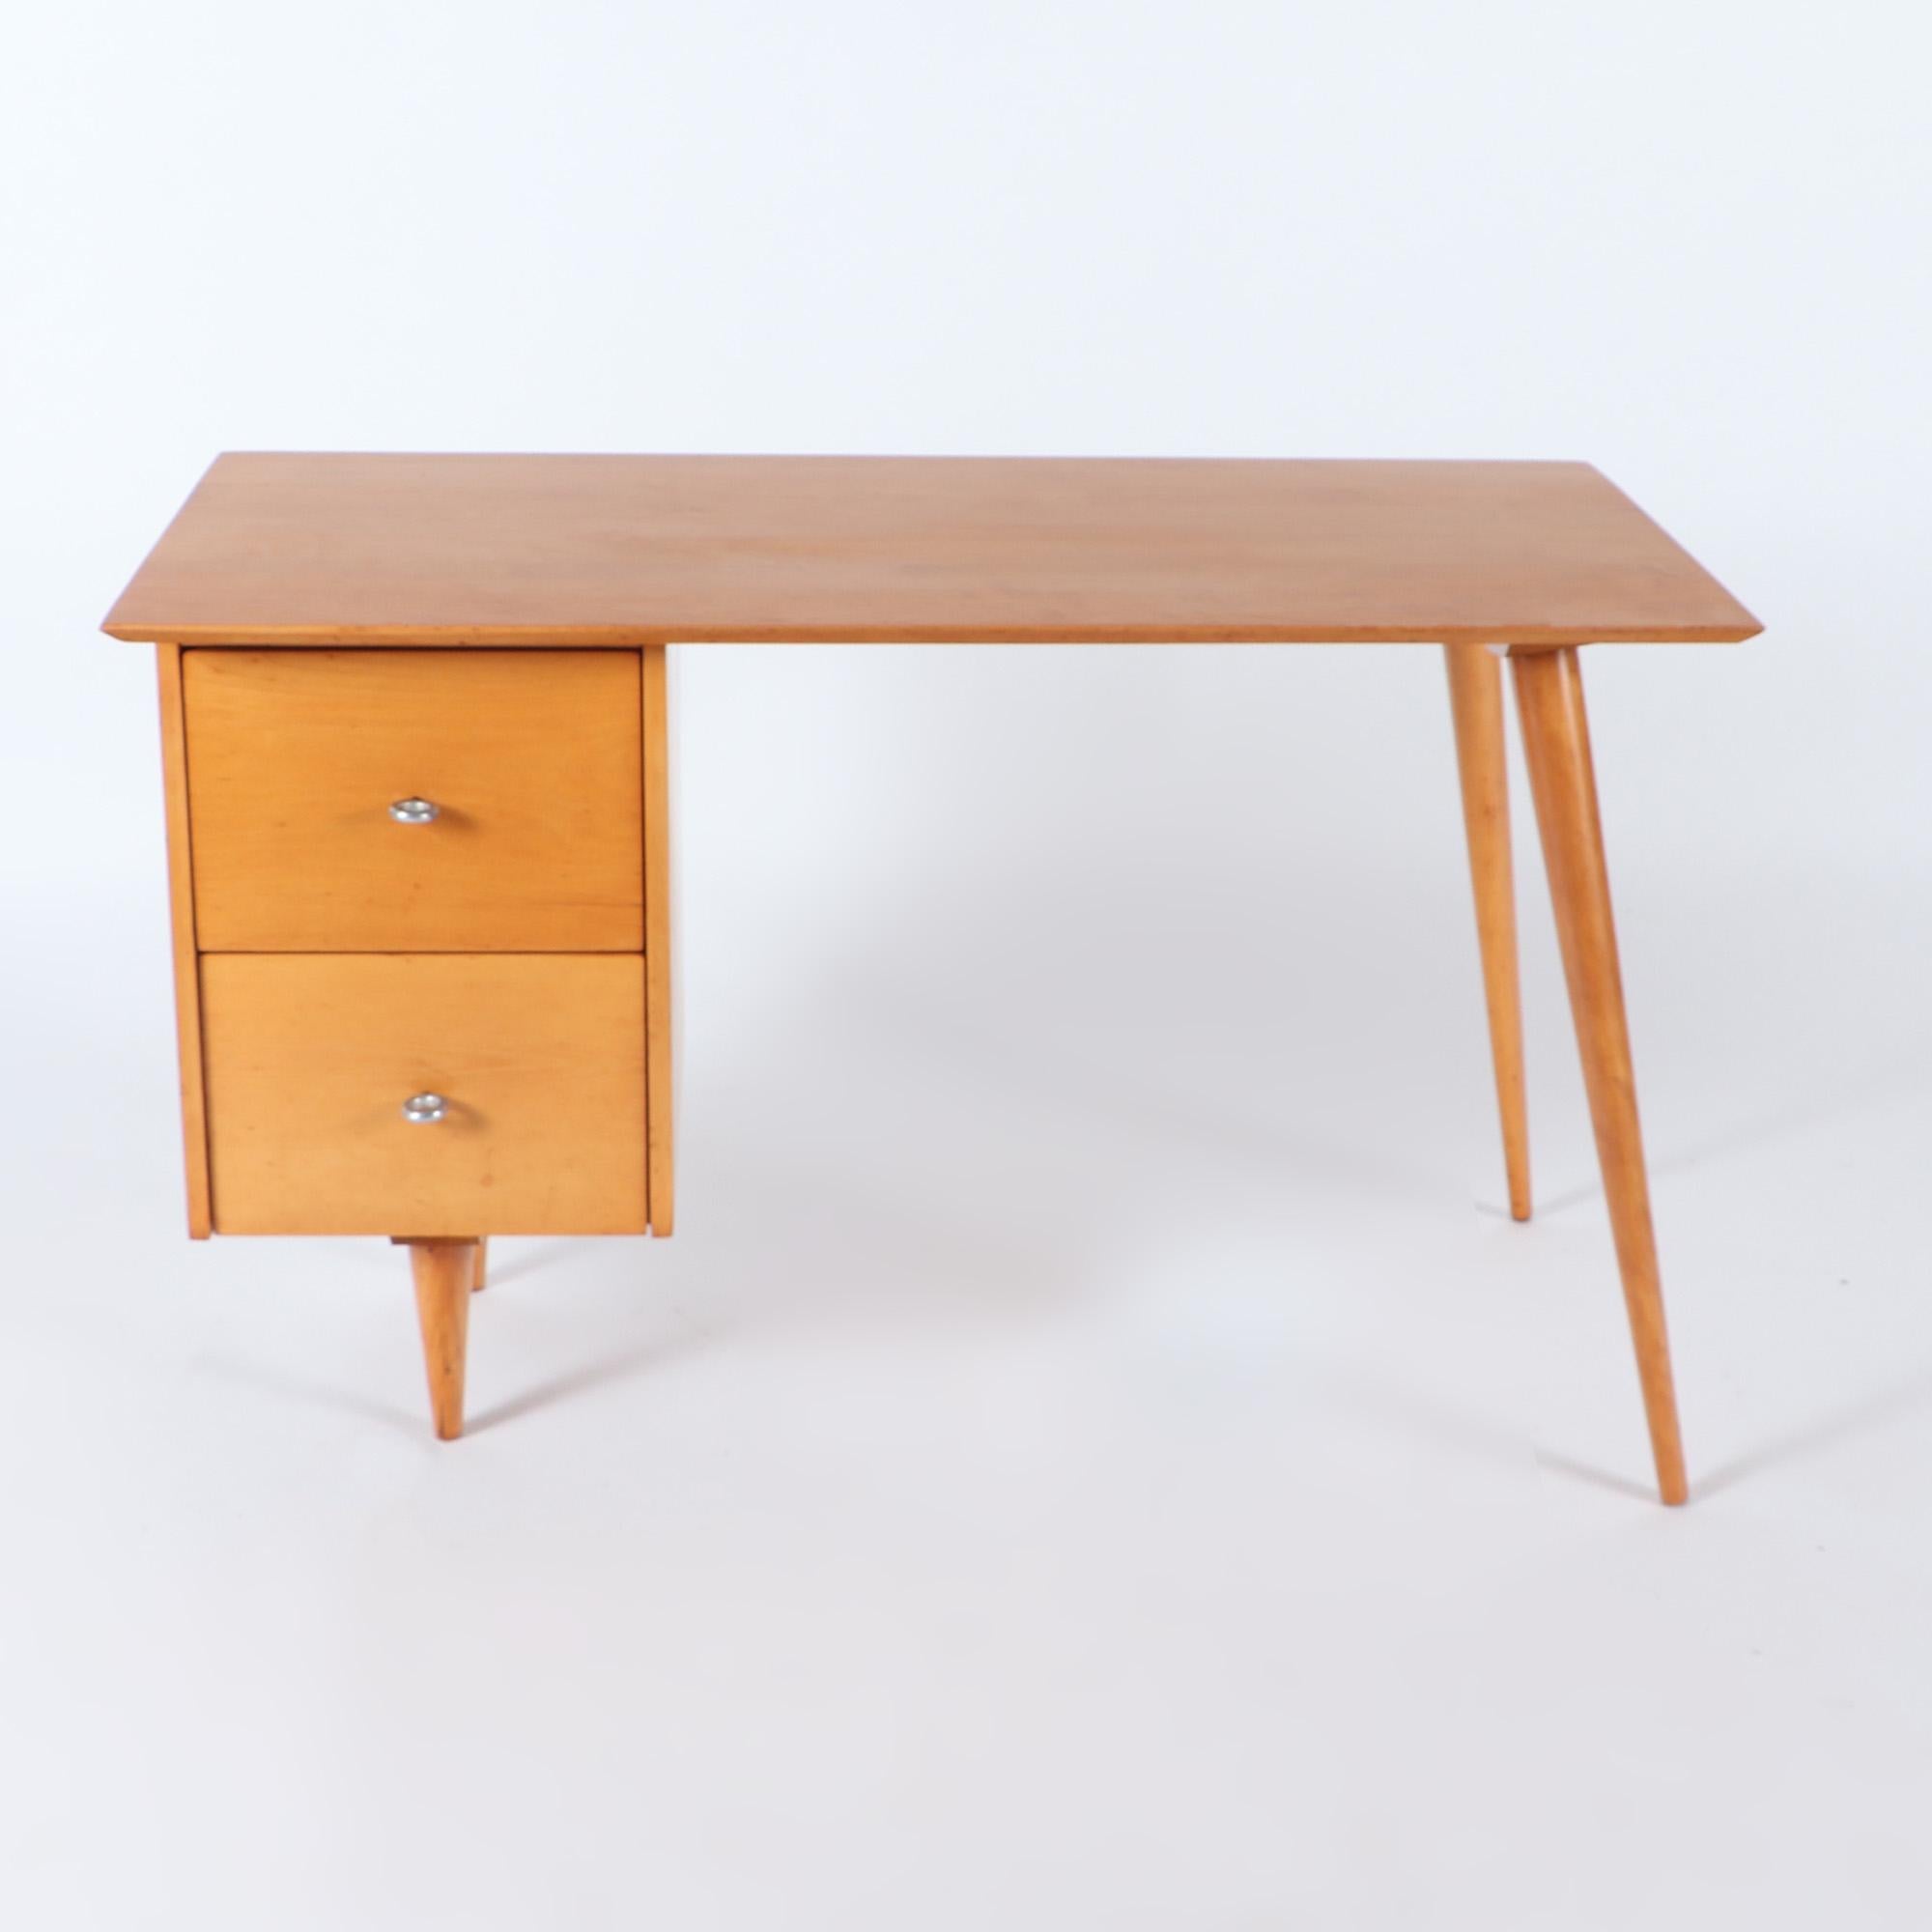 A Paul McCobb Planner Group For Wichedon mid century modern maple desk model 1560, labeled on underside, circa 1960.